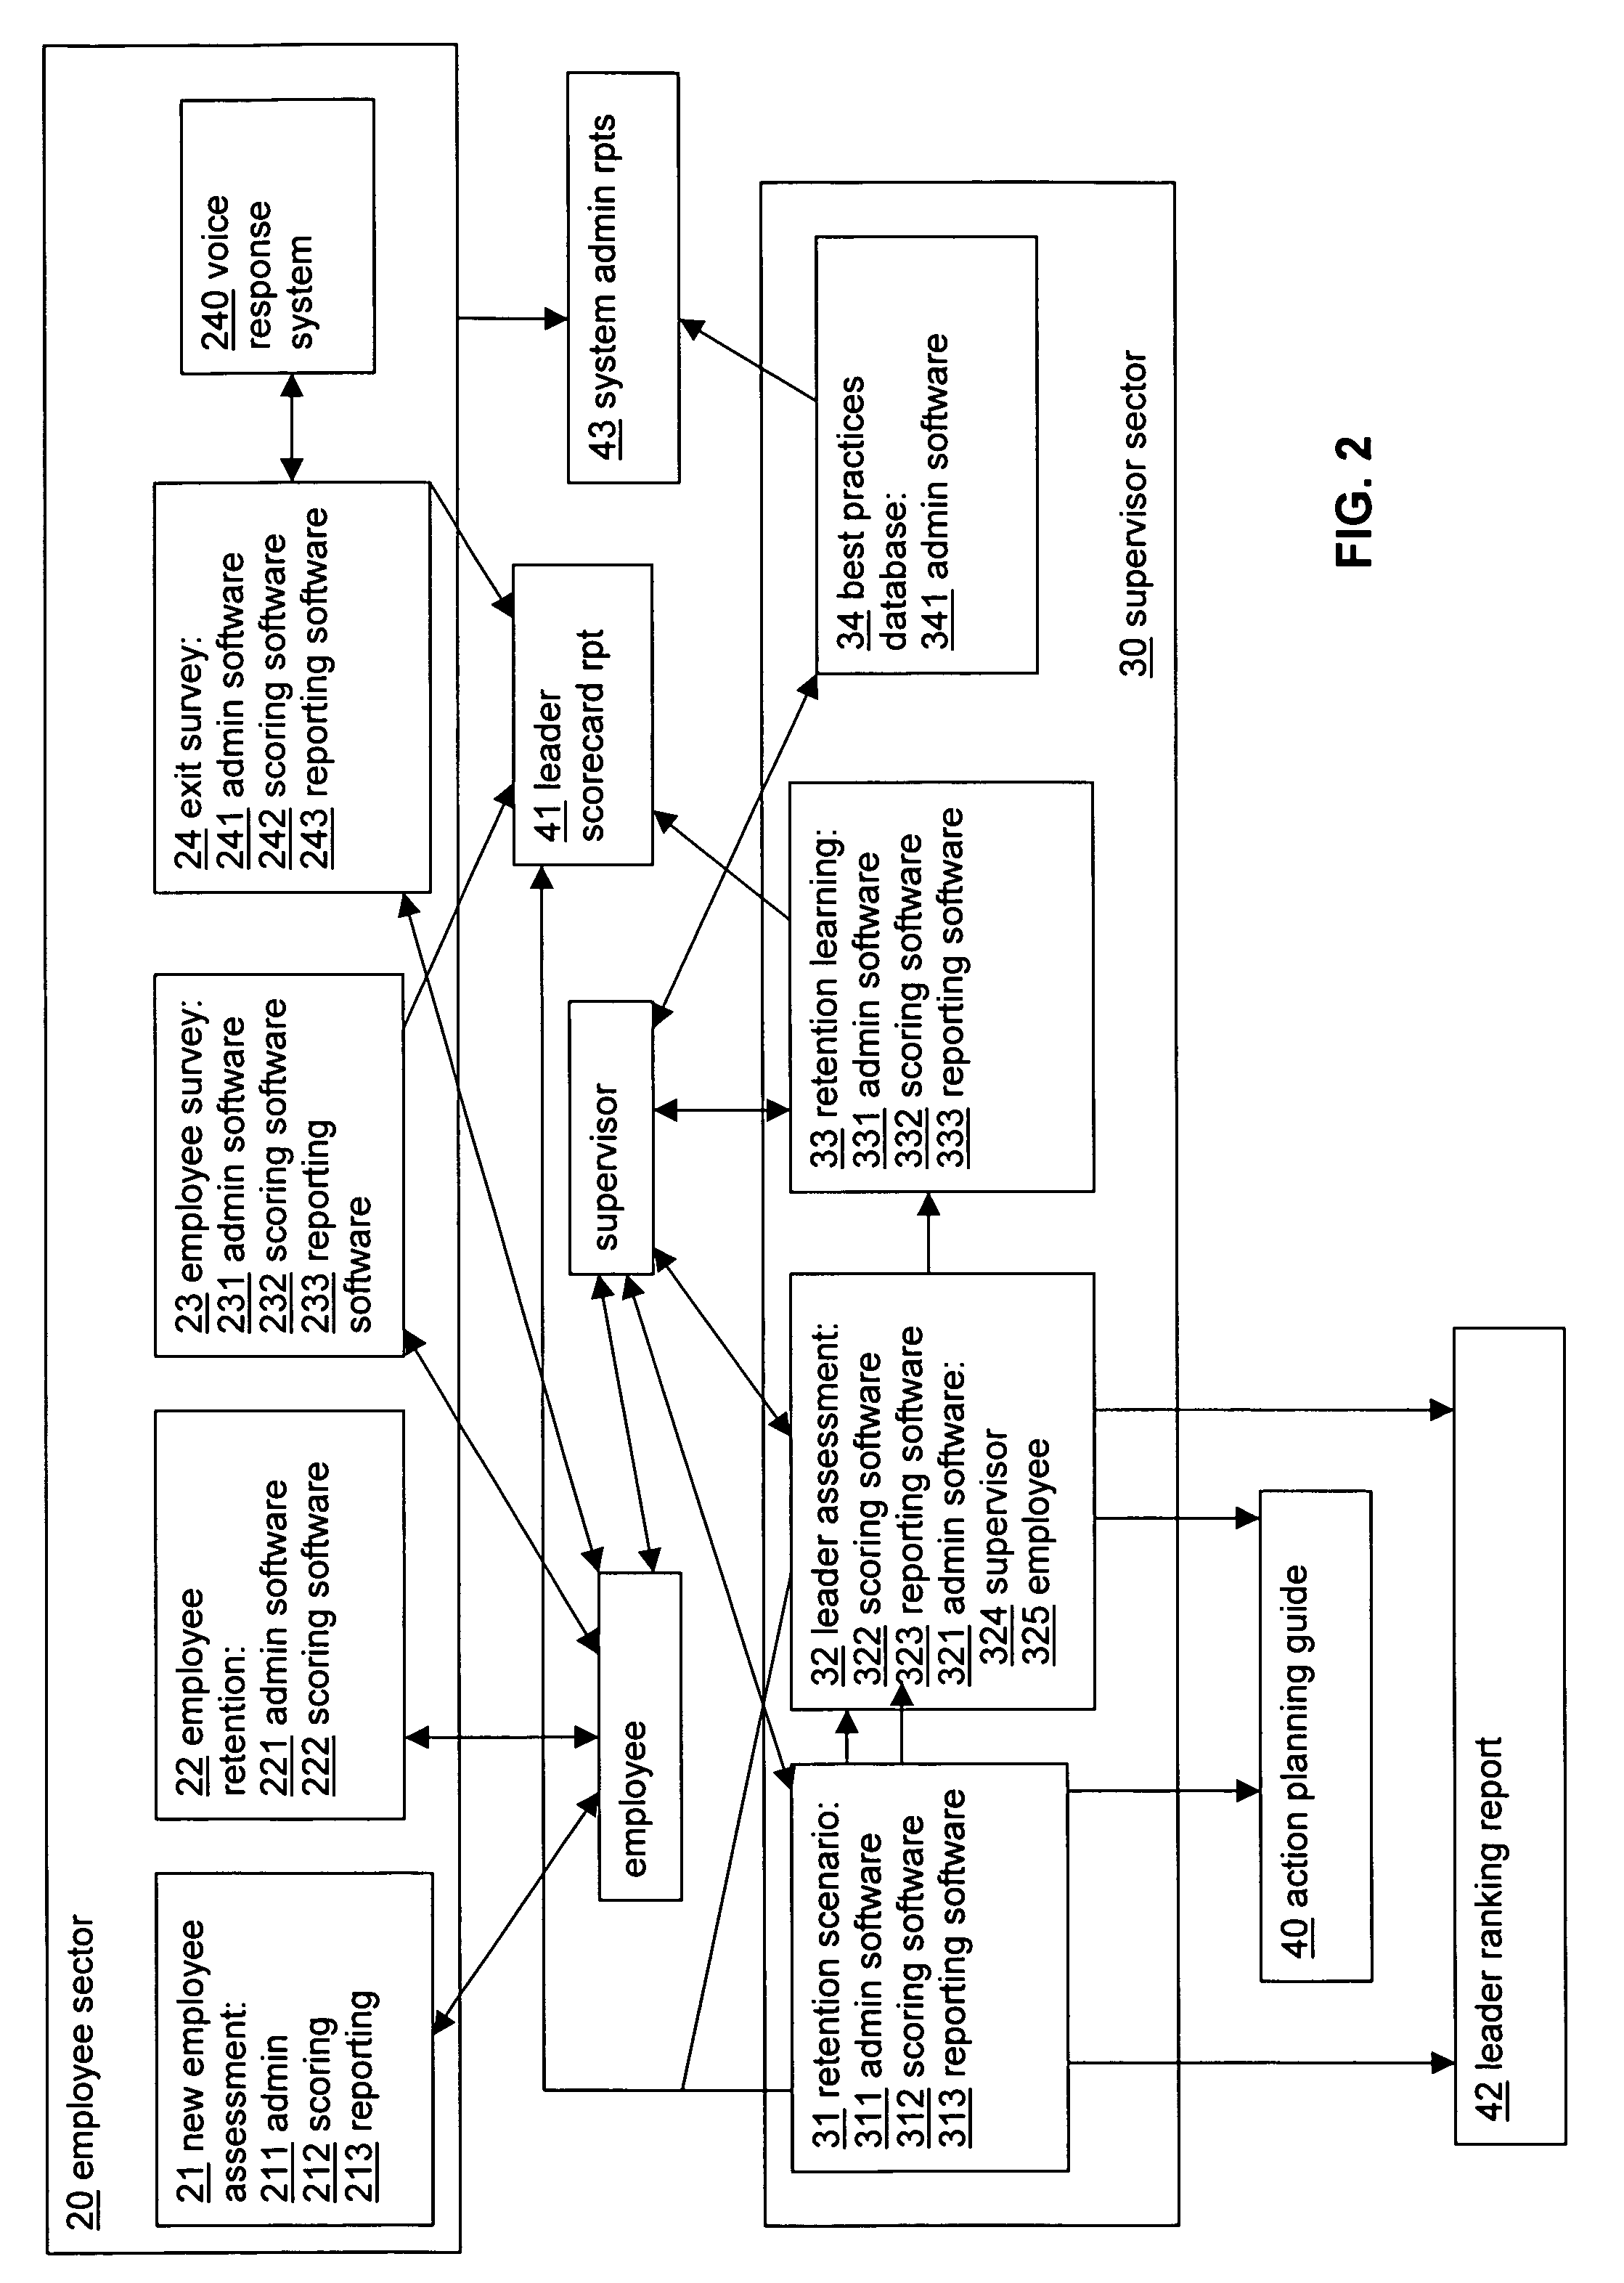 Employee retention system and associated methods